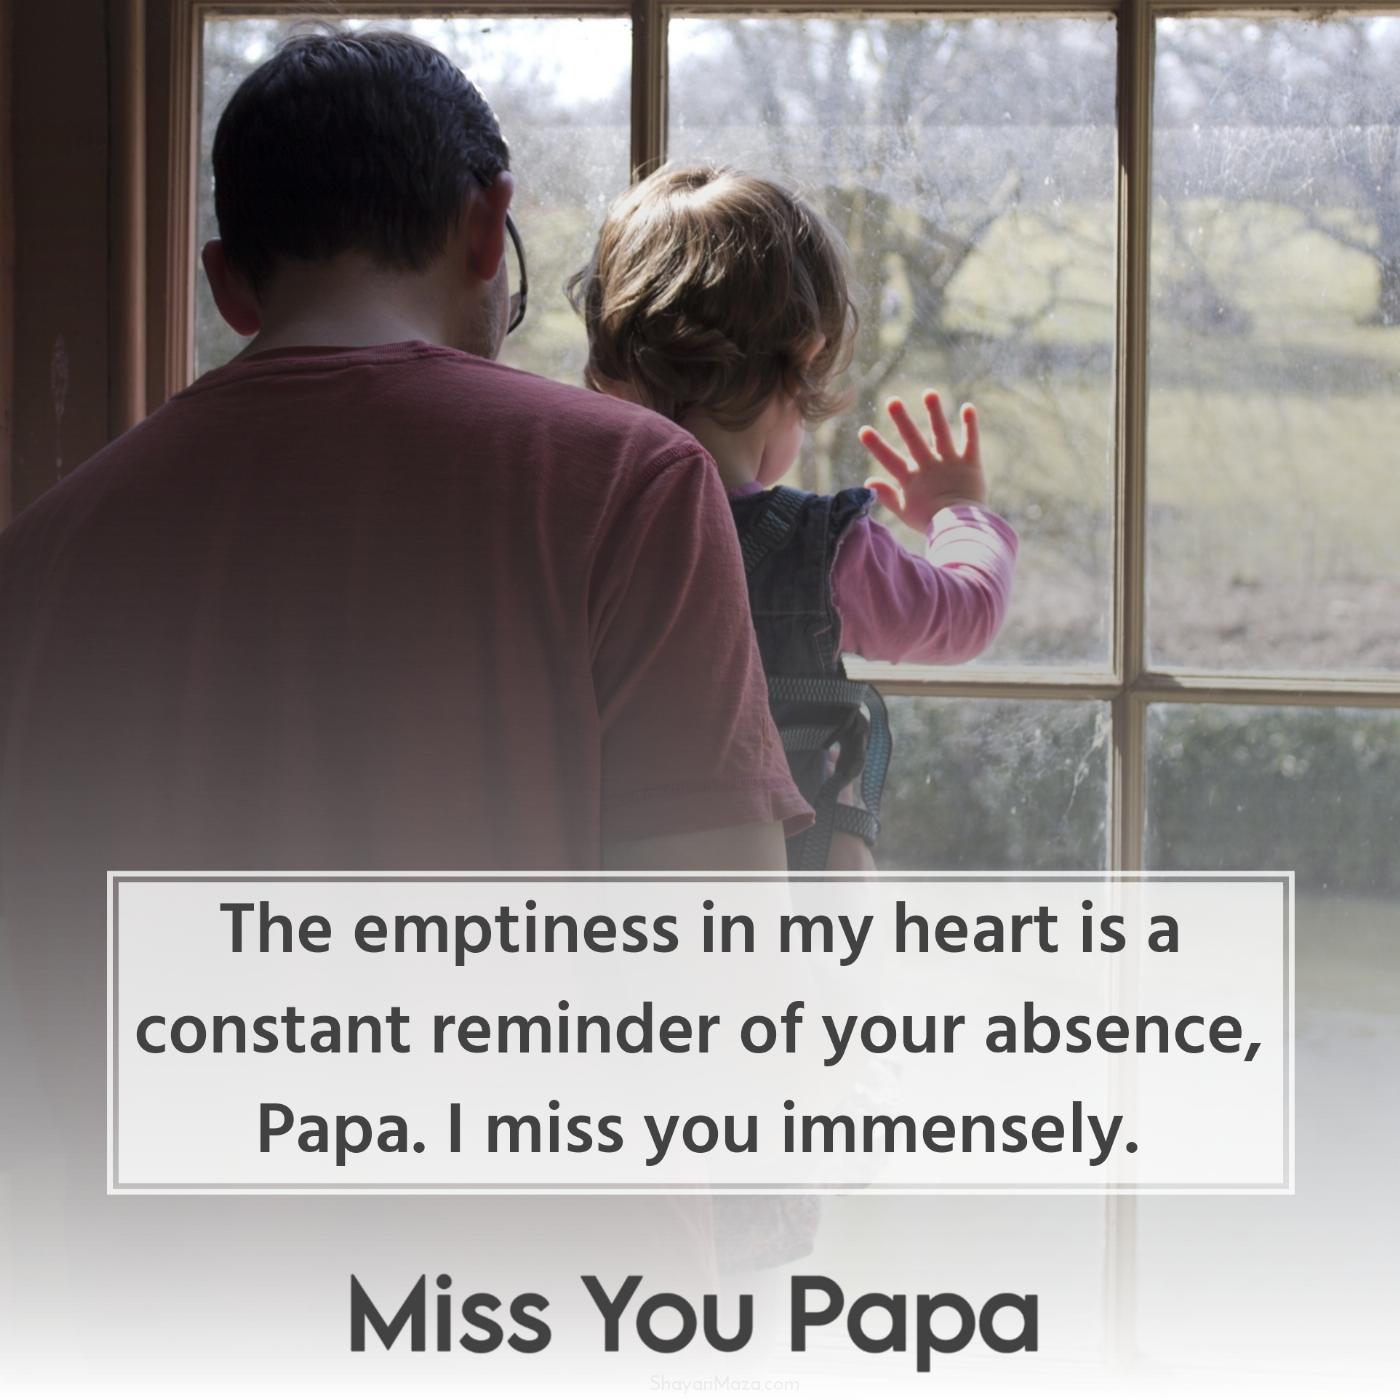 The emptiness in my heart is a constant reminder of your absence Papa